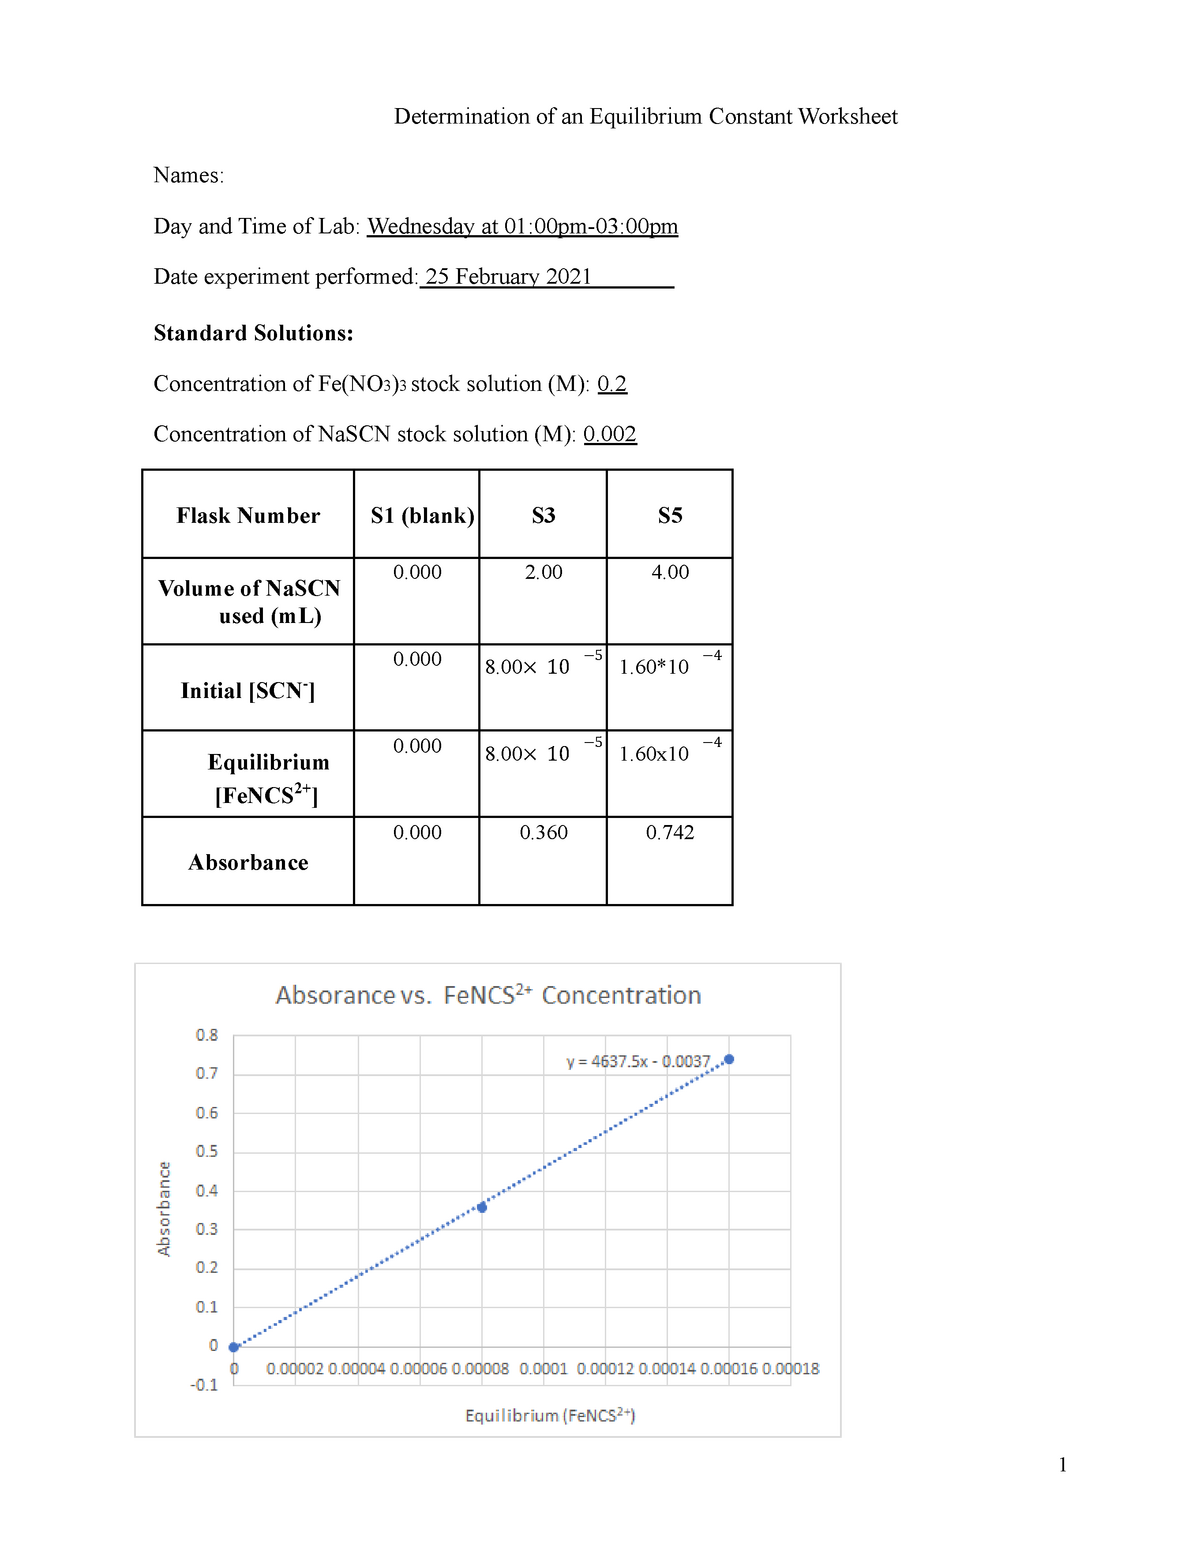 Keq Report Sheet Determination of an Equilibrium Constant Worksheet